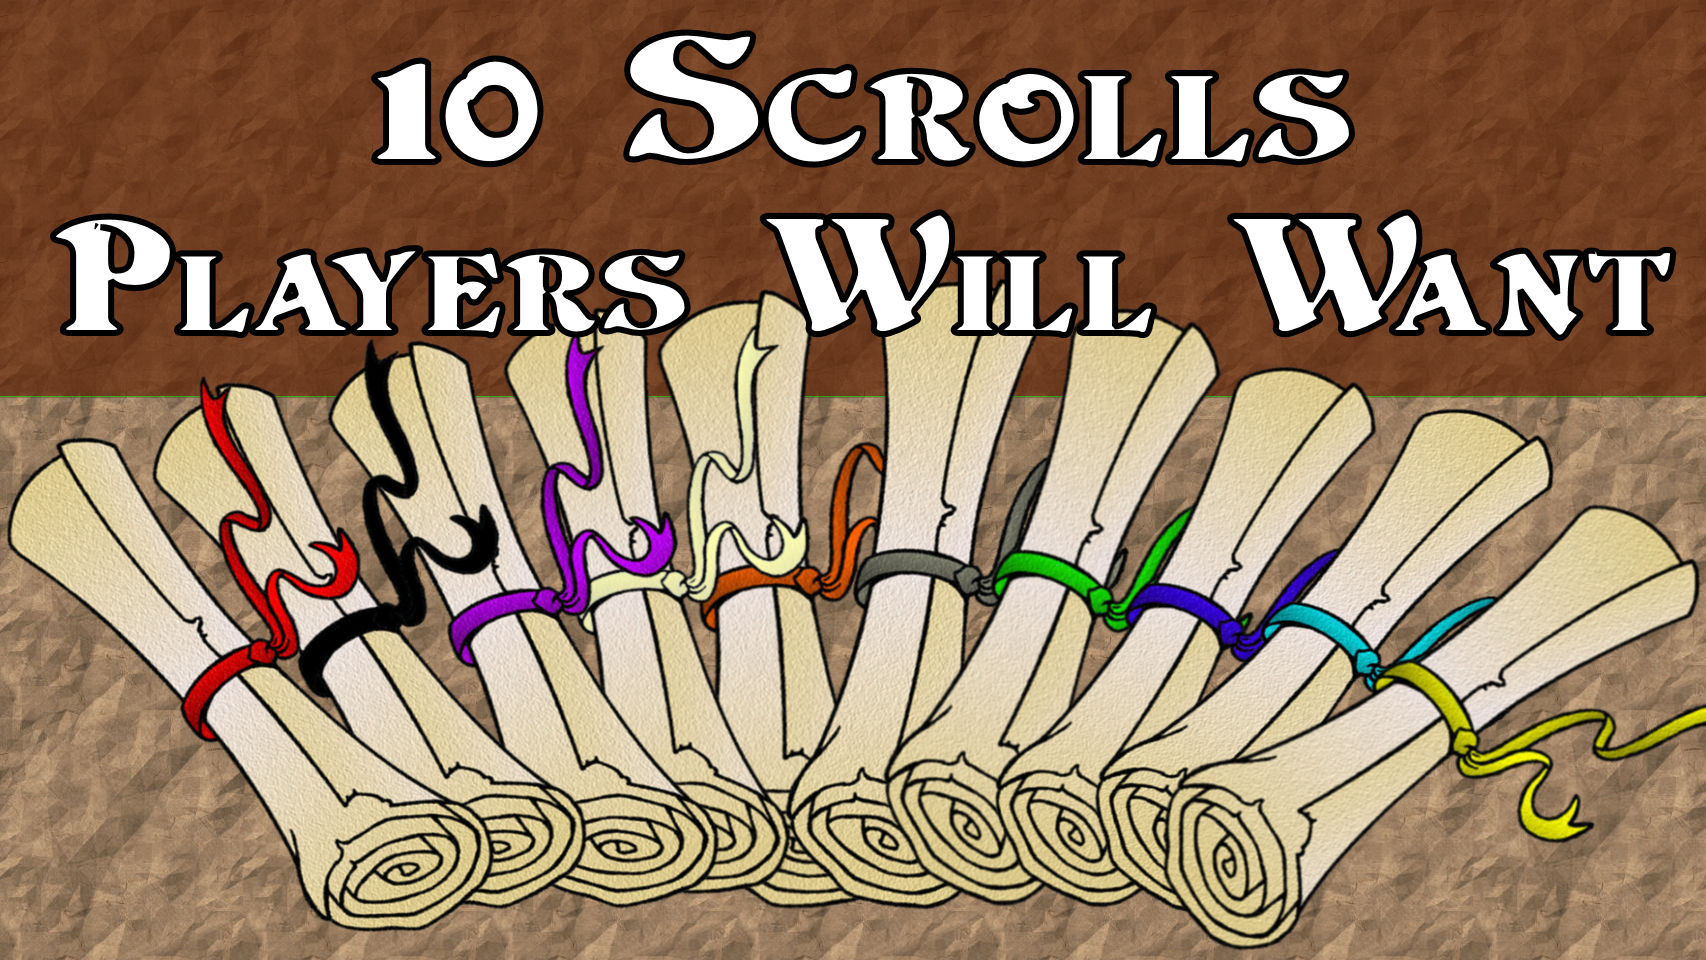 Magic Items - 10 Scrolls that Players will Want